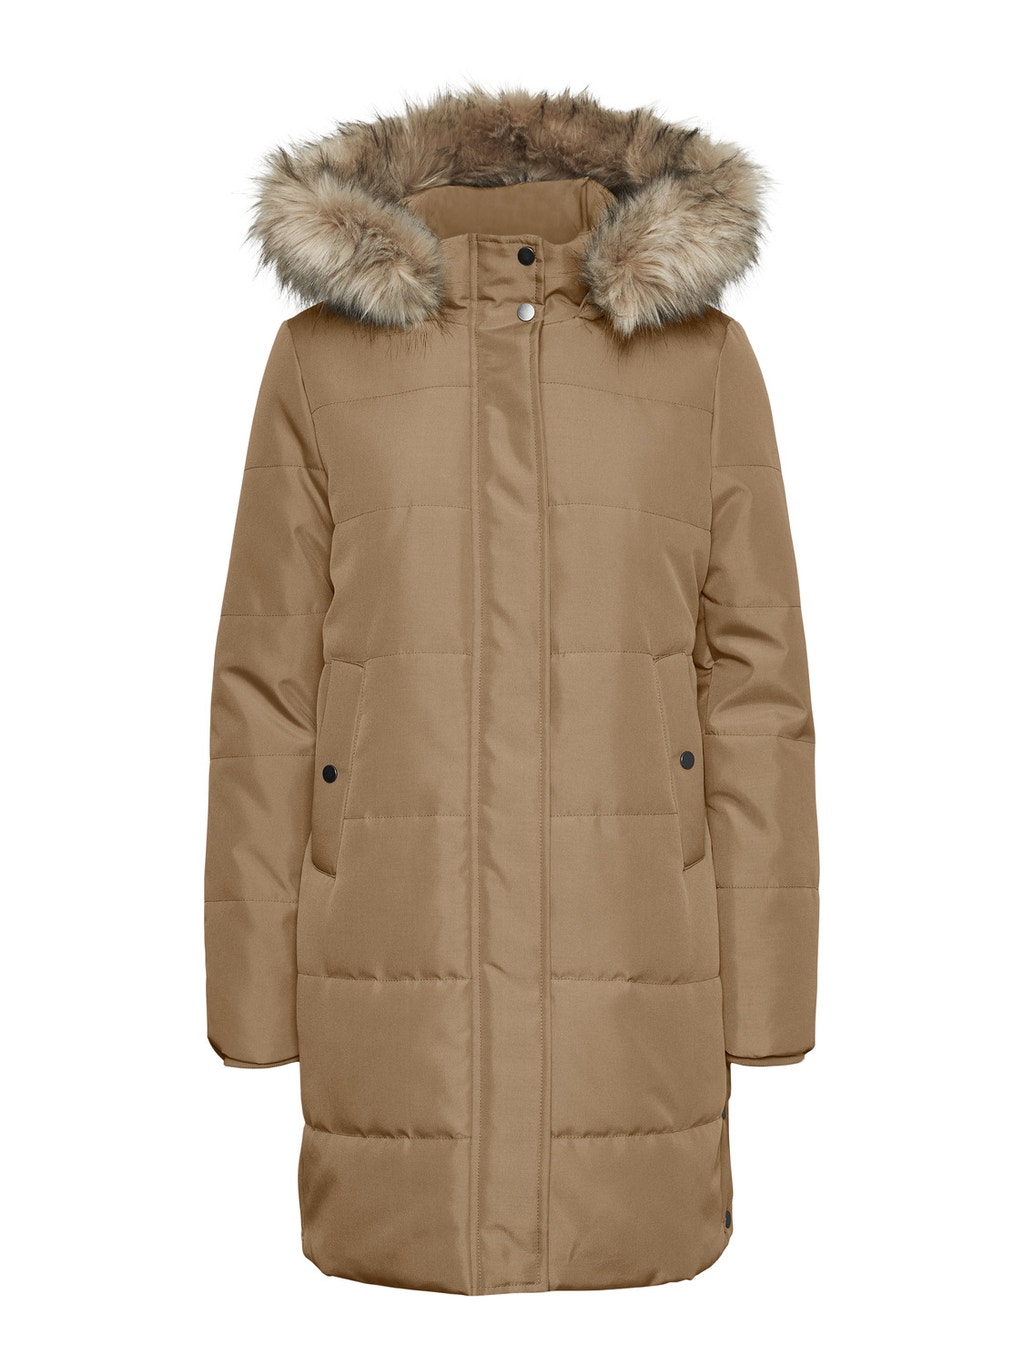 Hood with faux fur lining Curve Coat with 50% discount! | Vero Moda®